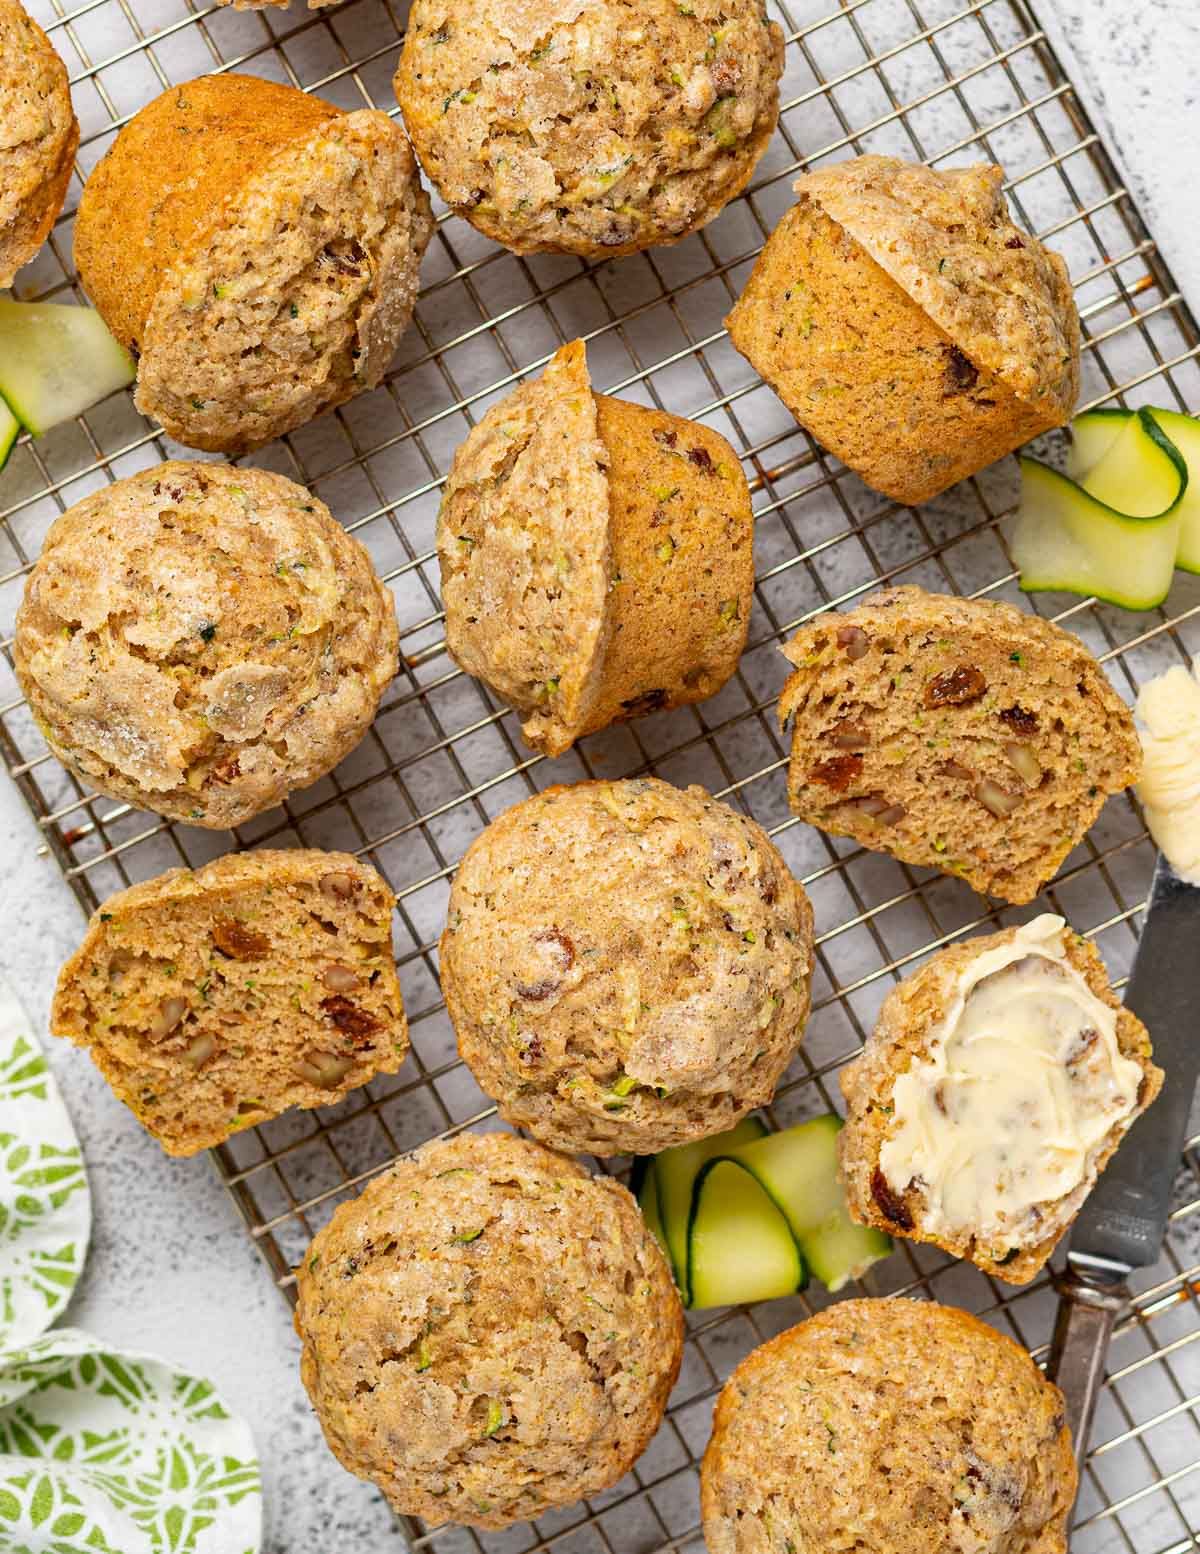 zucchnii muffins lay no a wire cooling rack